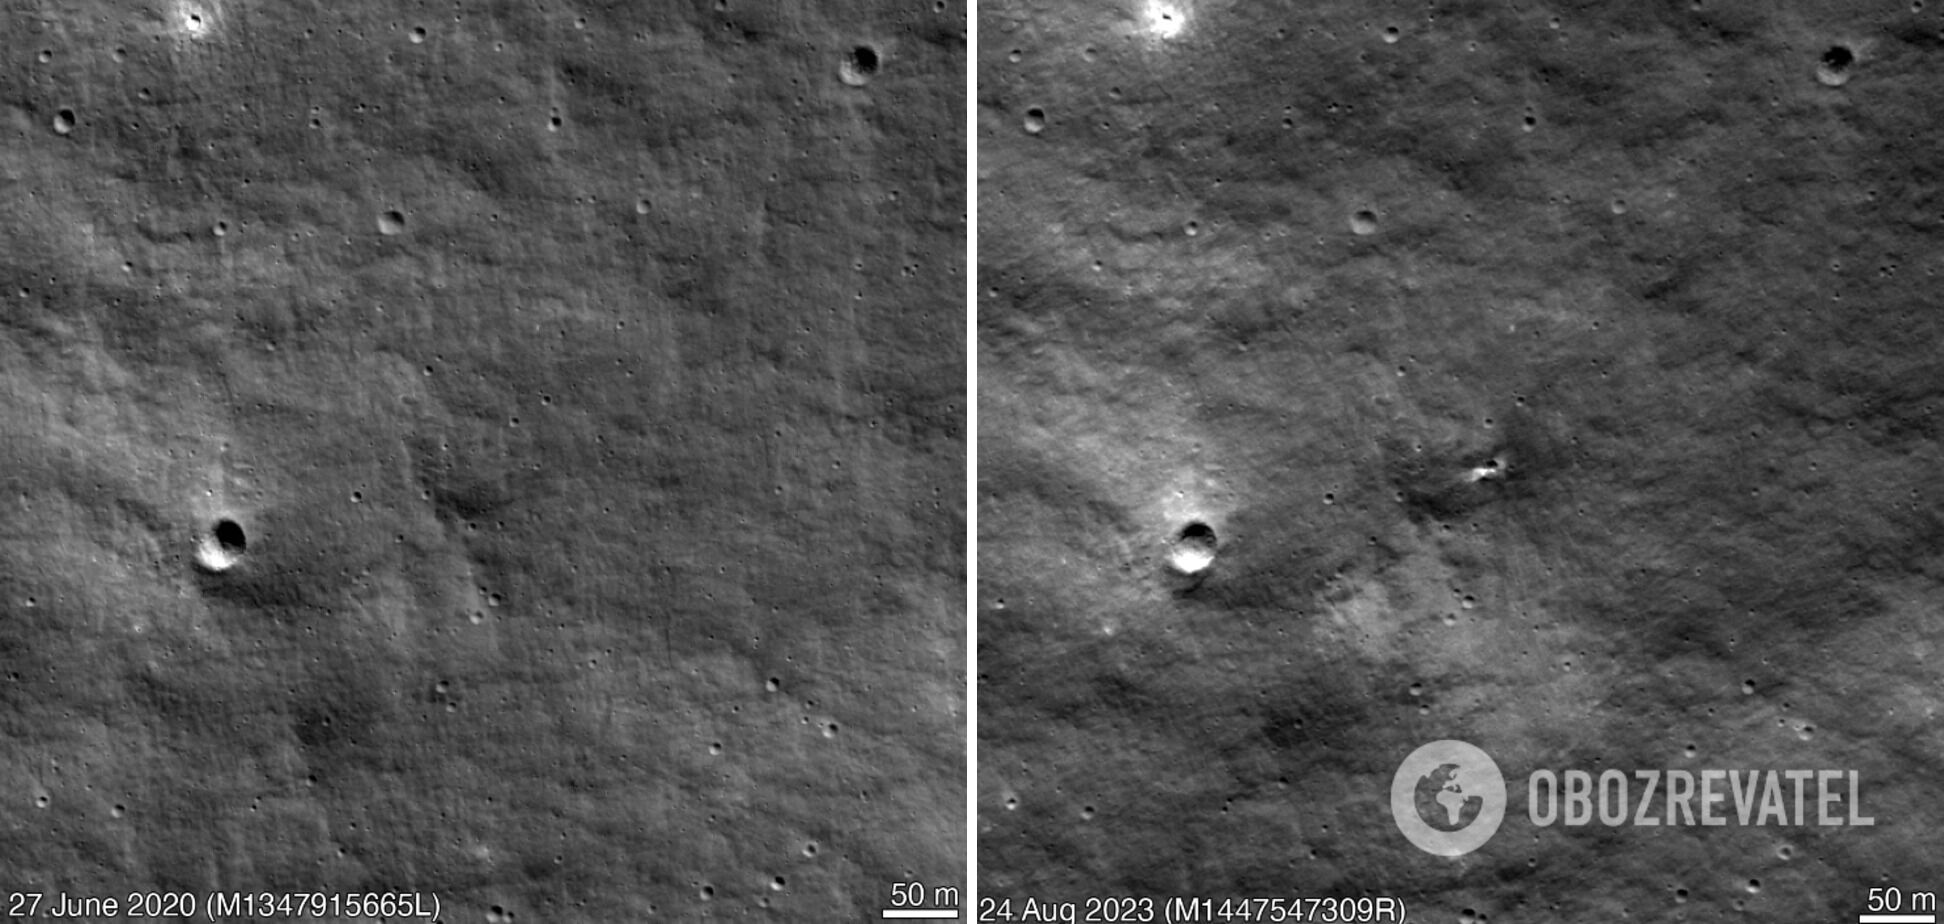 Russia can hit the bottom not only on Earth: a crater from the fall of the Luna-25 module was formed on the Moon. Photo